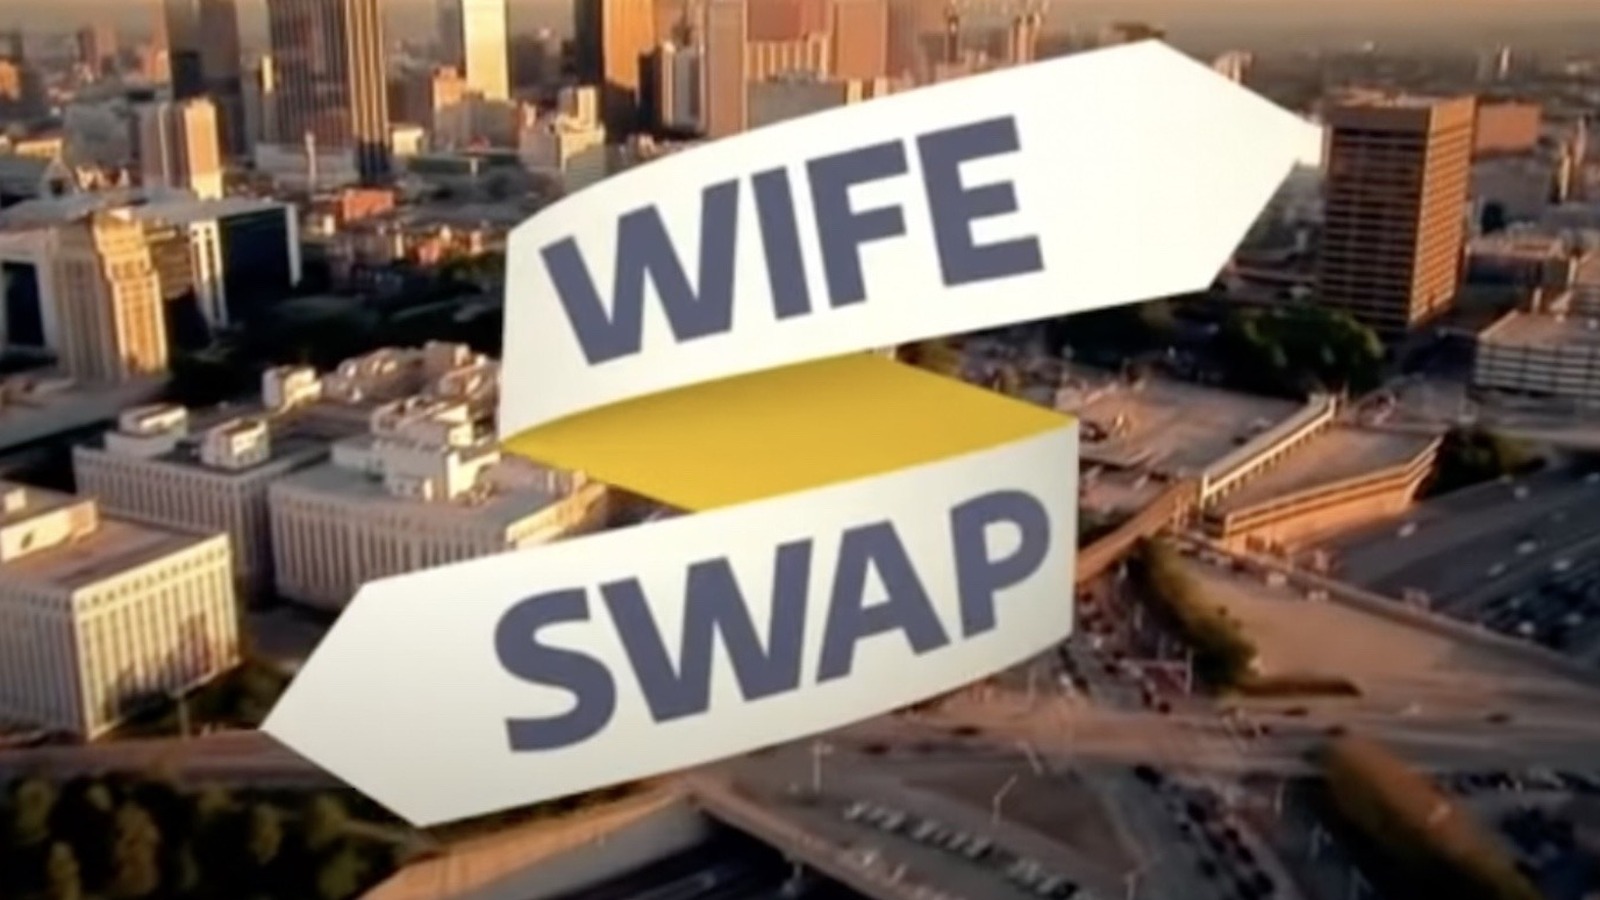 Messed Up Stories About The People On Wife Swap pic